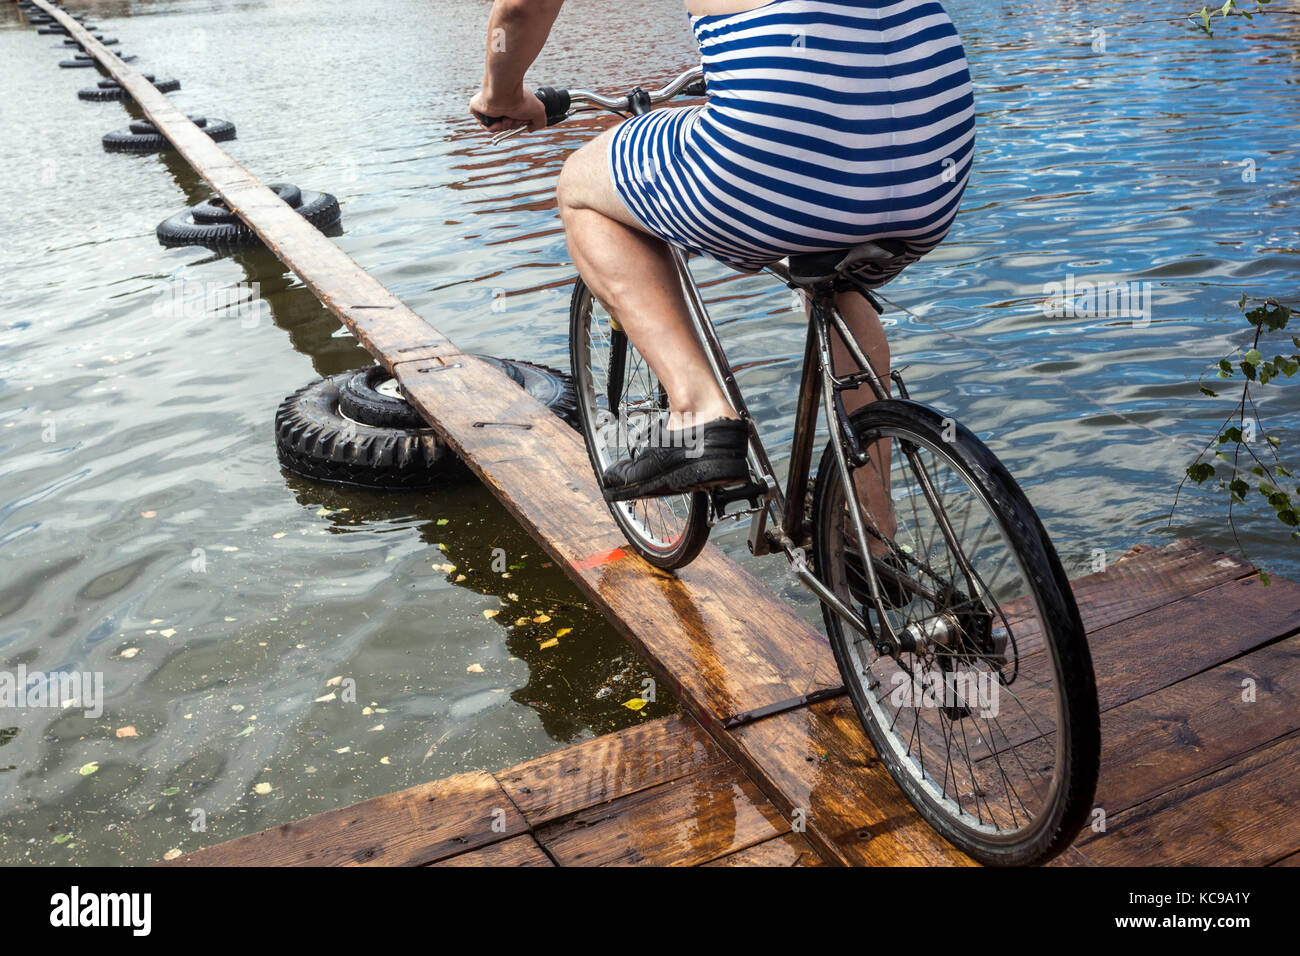 Czech festival, A cyclist on a wooden footbridge tries to cross the pond, an unusual sports bike across the water, a bike suit Striped Stock Photo